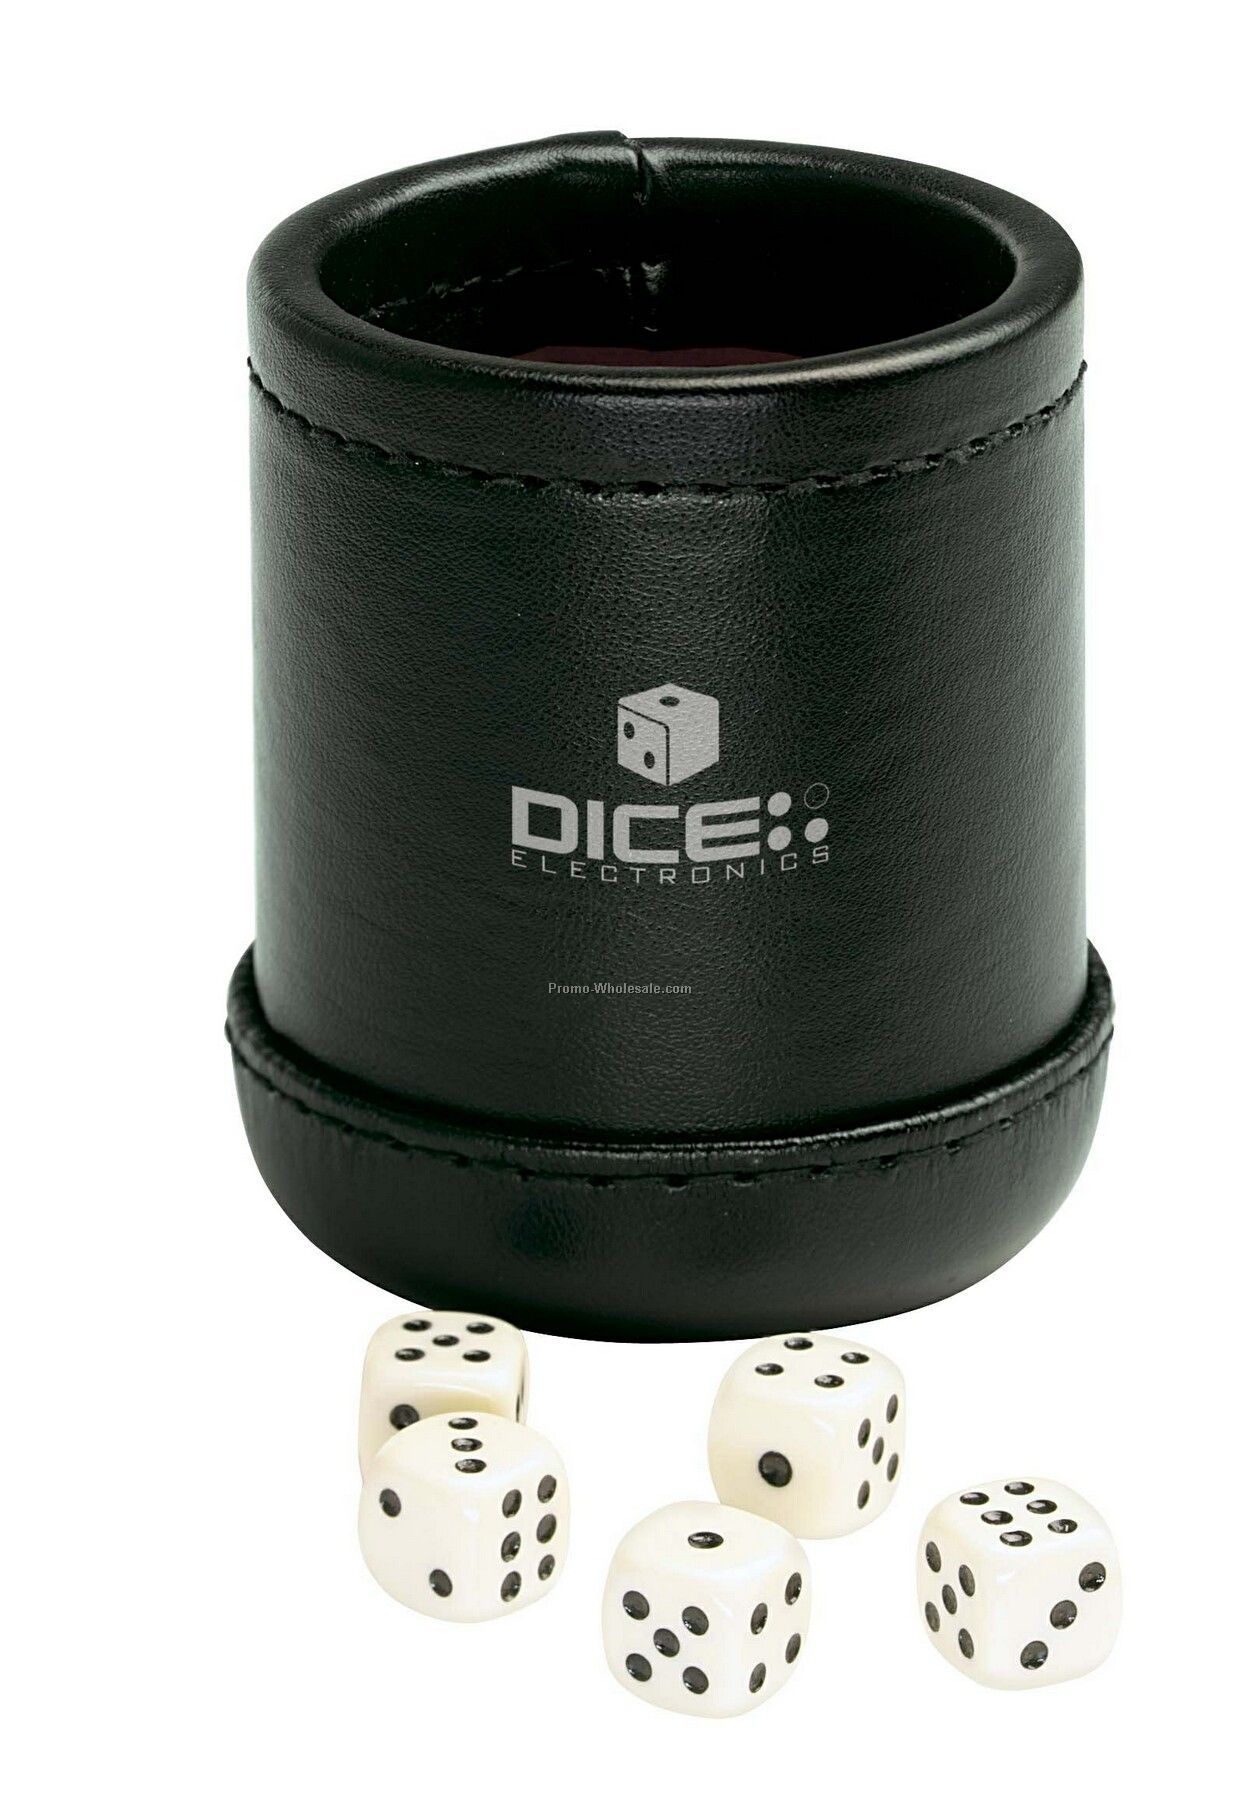 Action Line Dice Cup With Dice